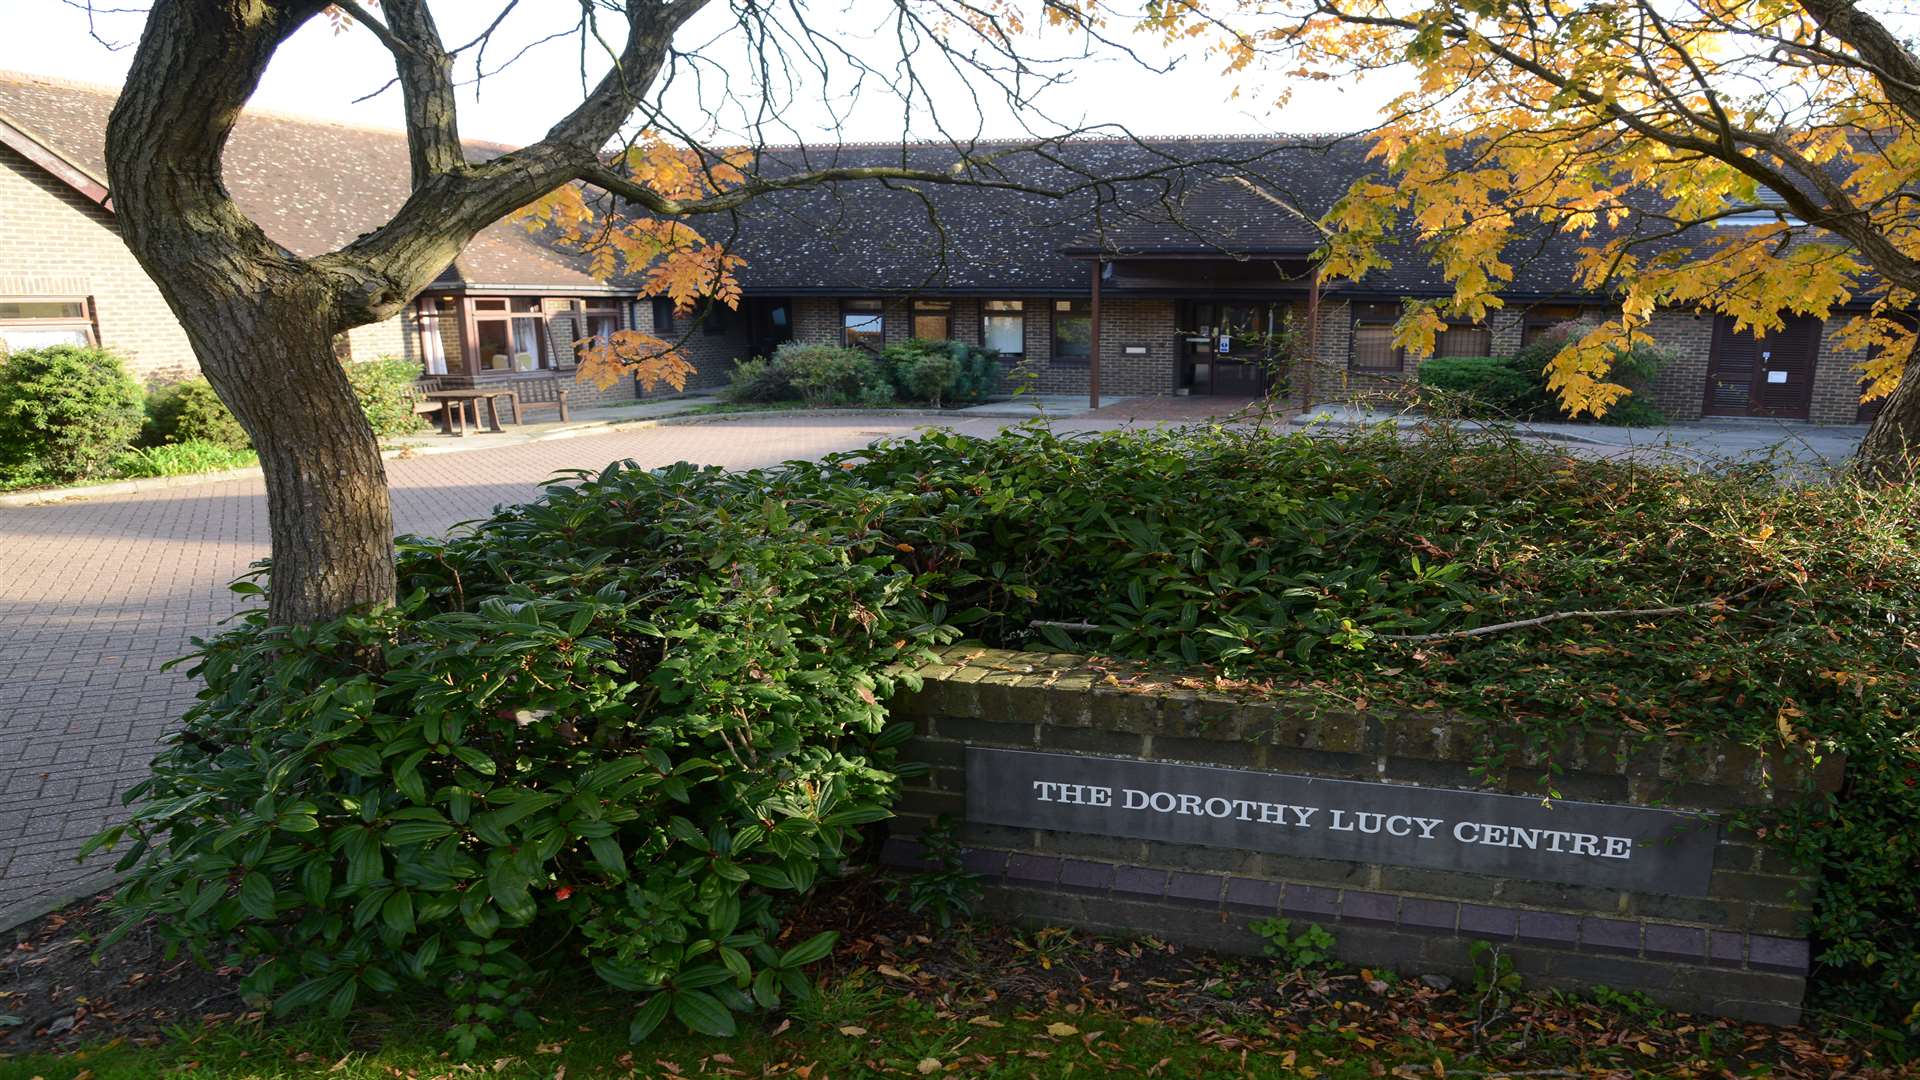 The Dorothy Lucy Centre will close completely next March